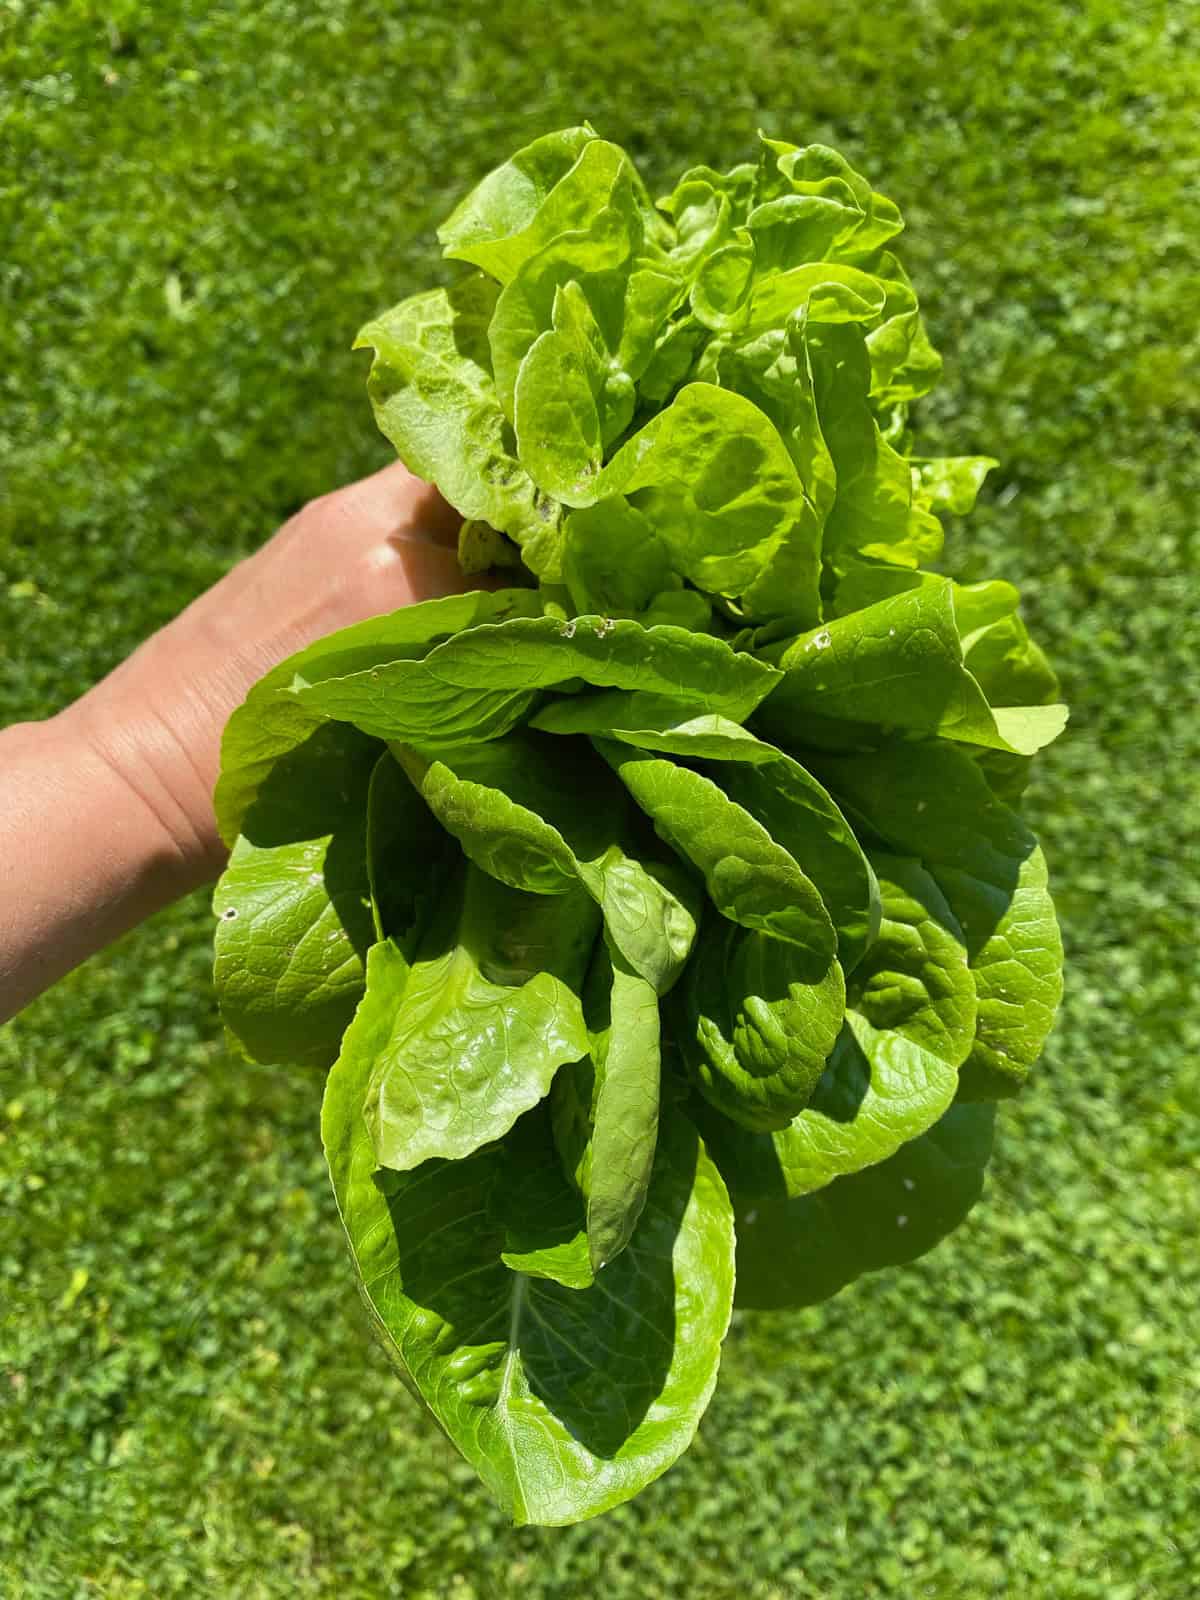 An image of a hand holding just picked heads of lettuce.